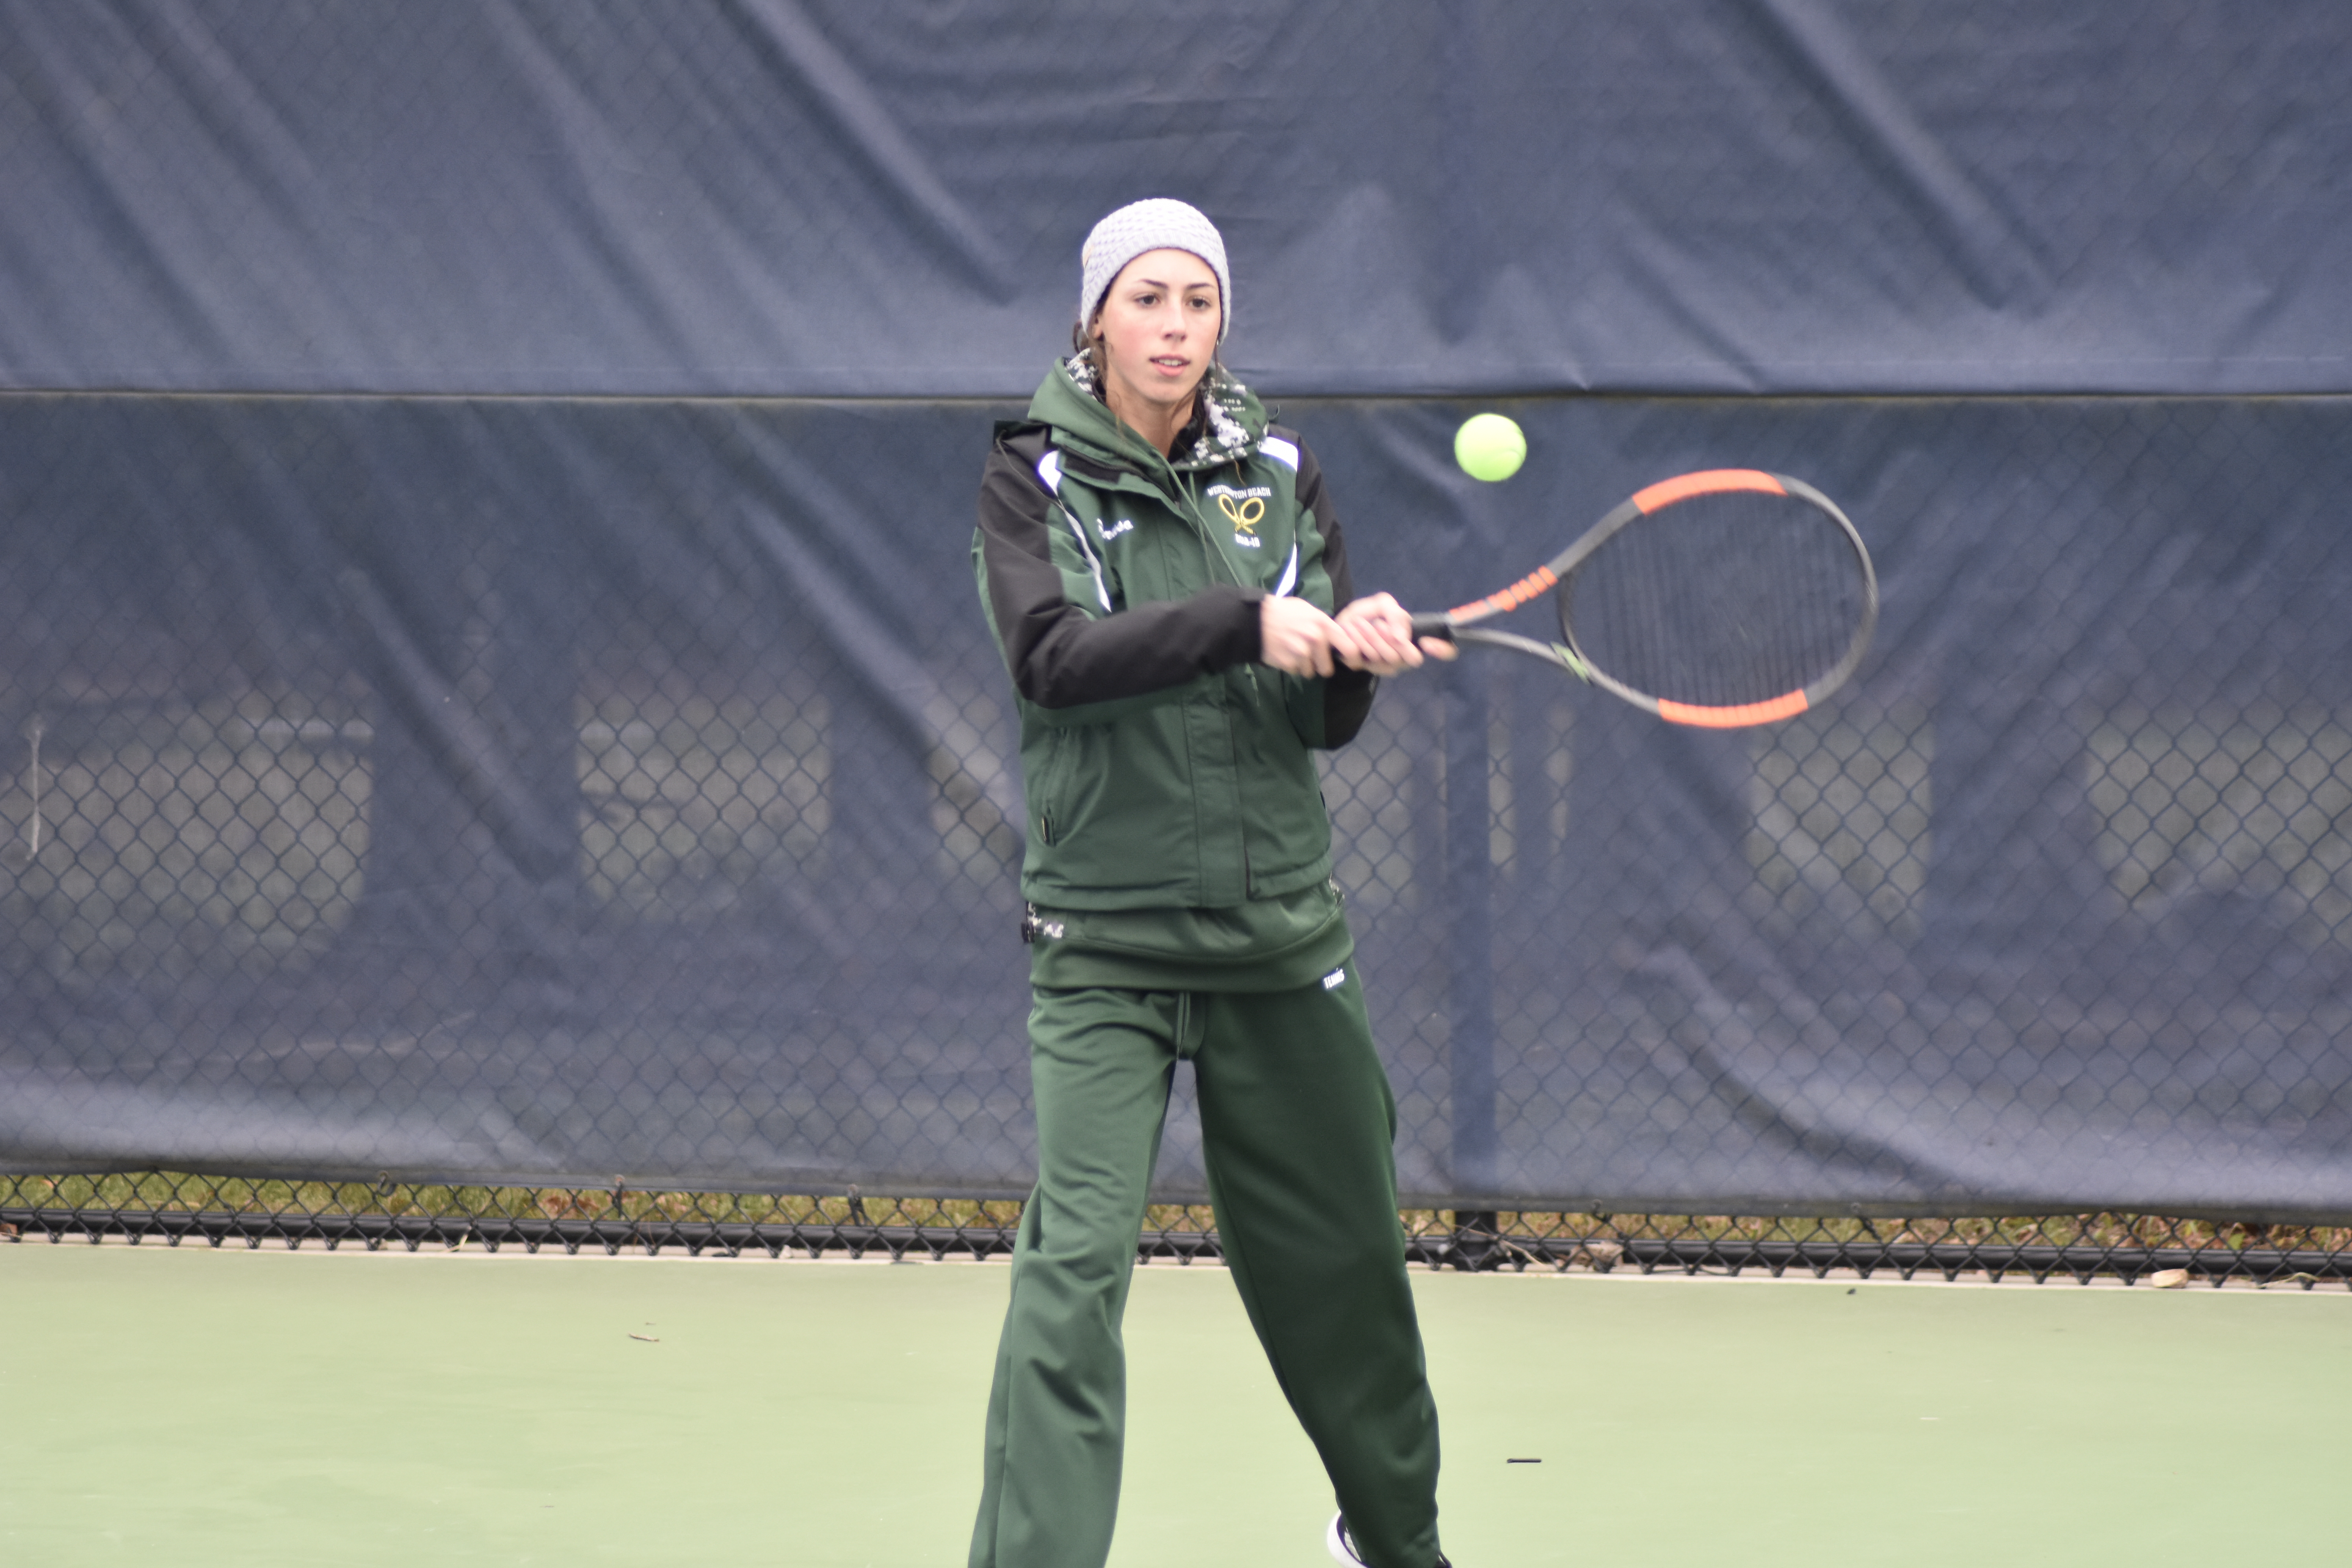 Rose Peruso, pictured, won the doubles title with teammate Jen Curran.